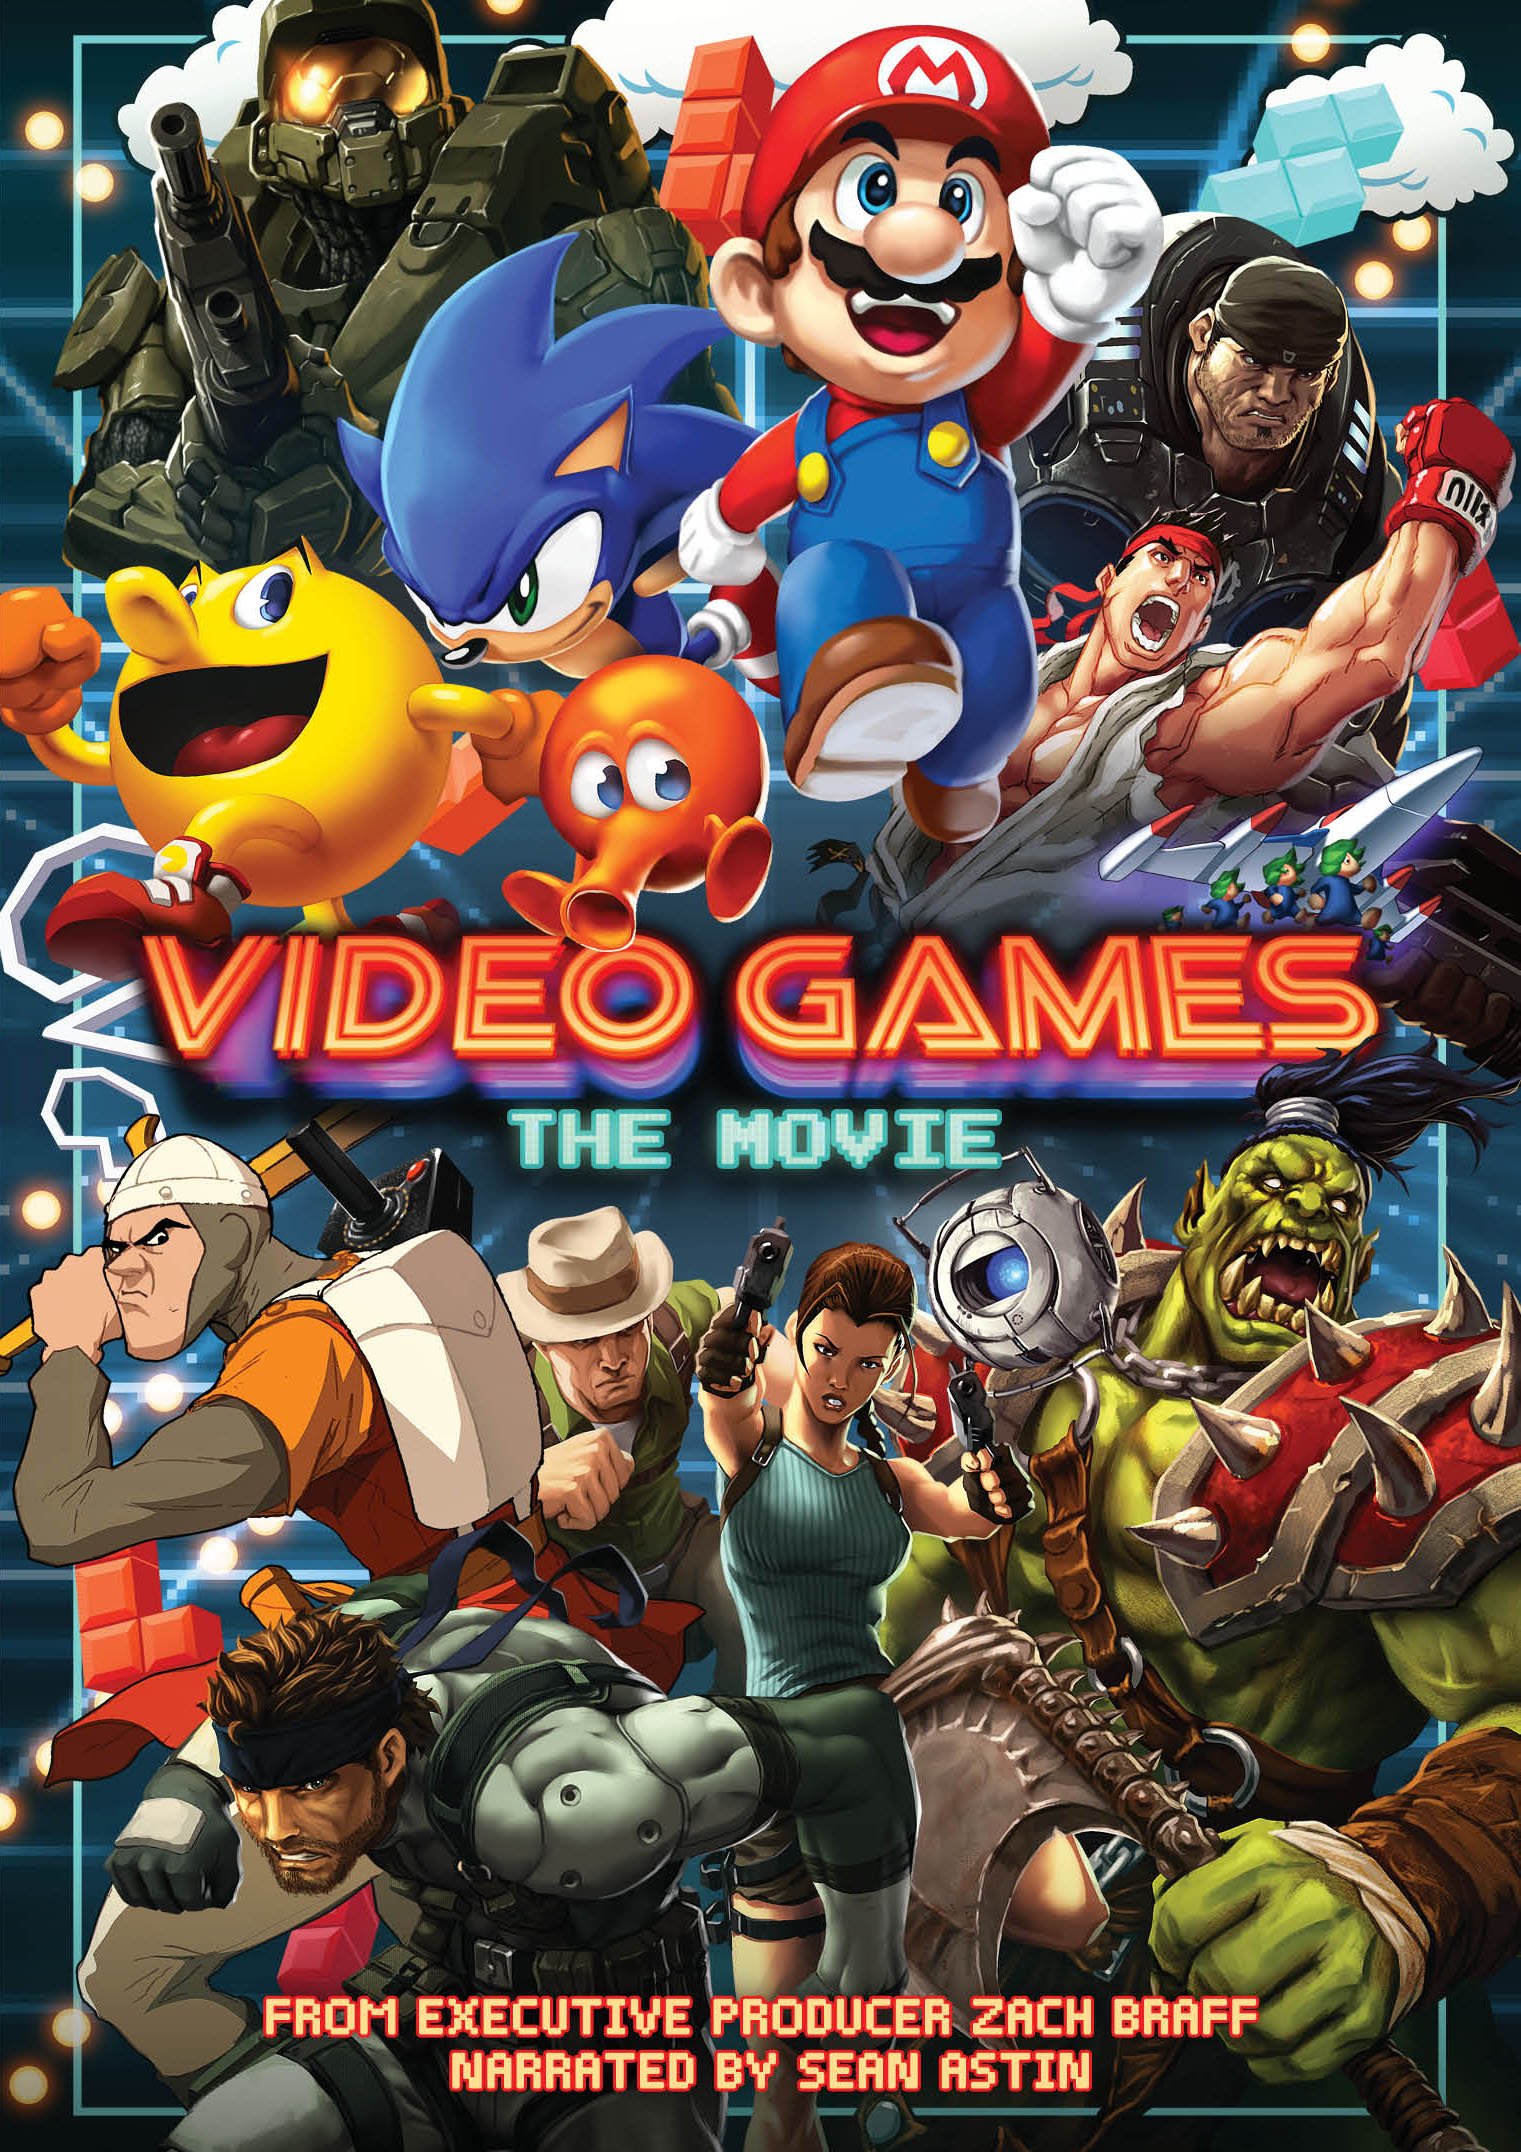 Video Games The Movie DVD Release Date February 3, 2015